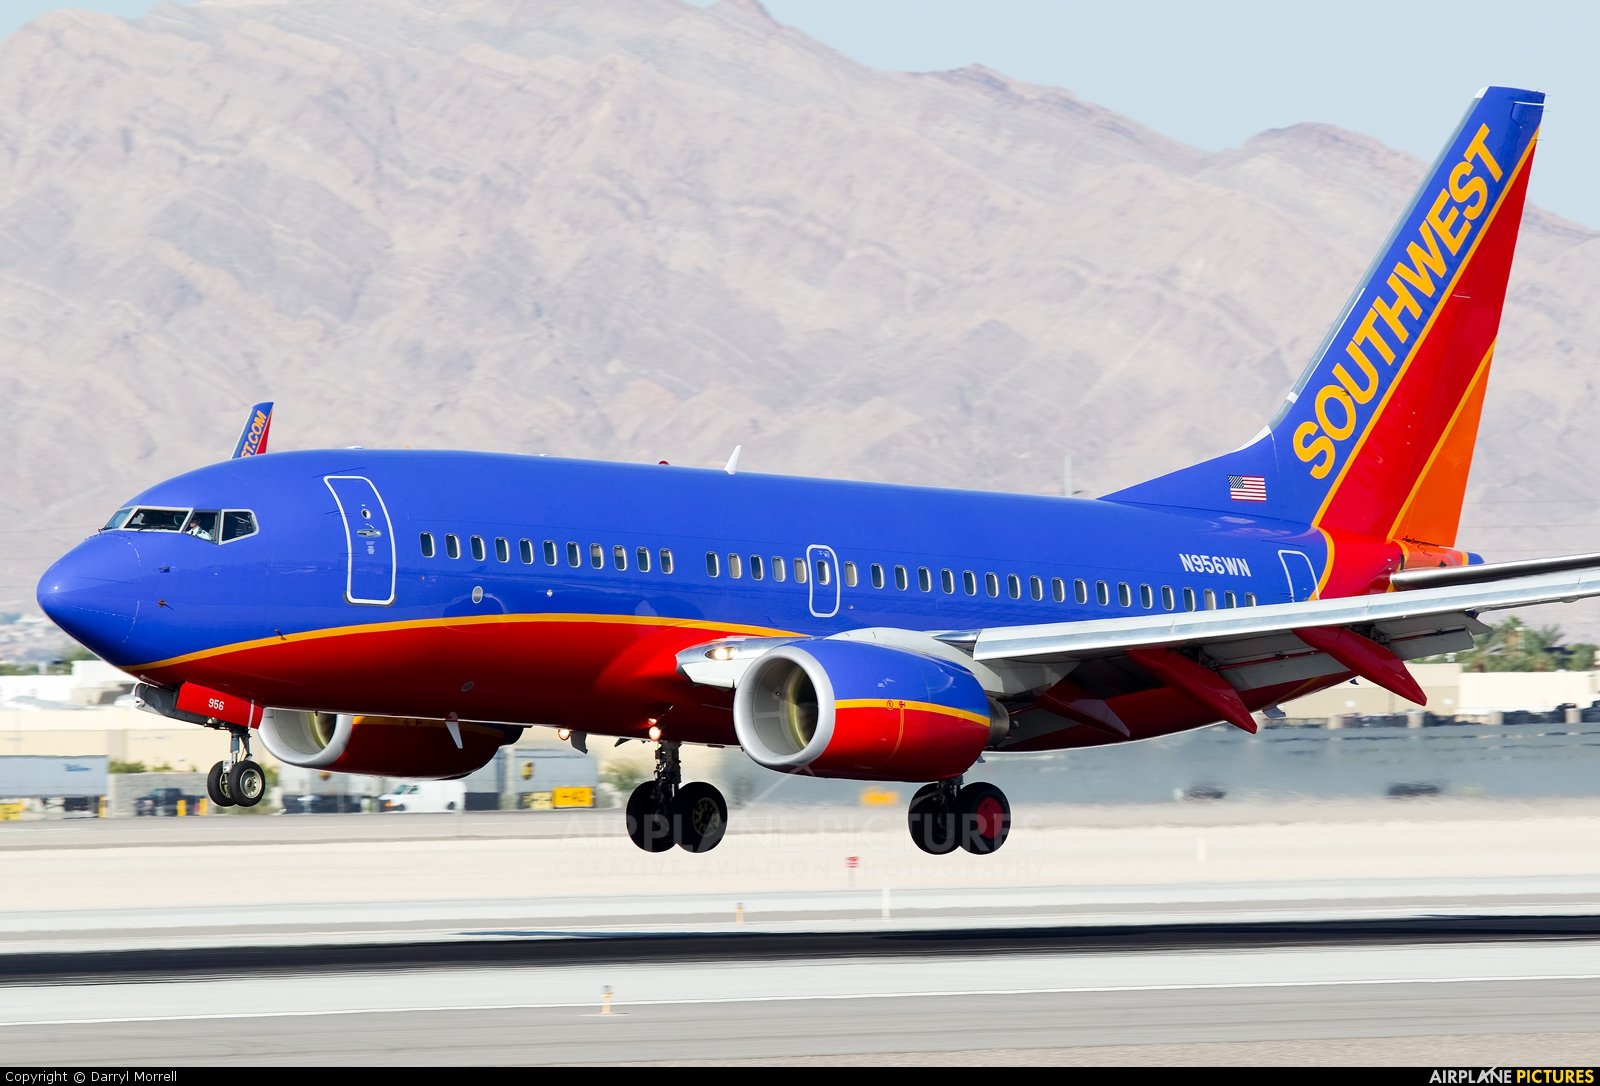 Southwest Airlines Closes Operations at Four Airports